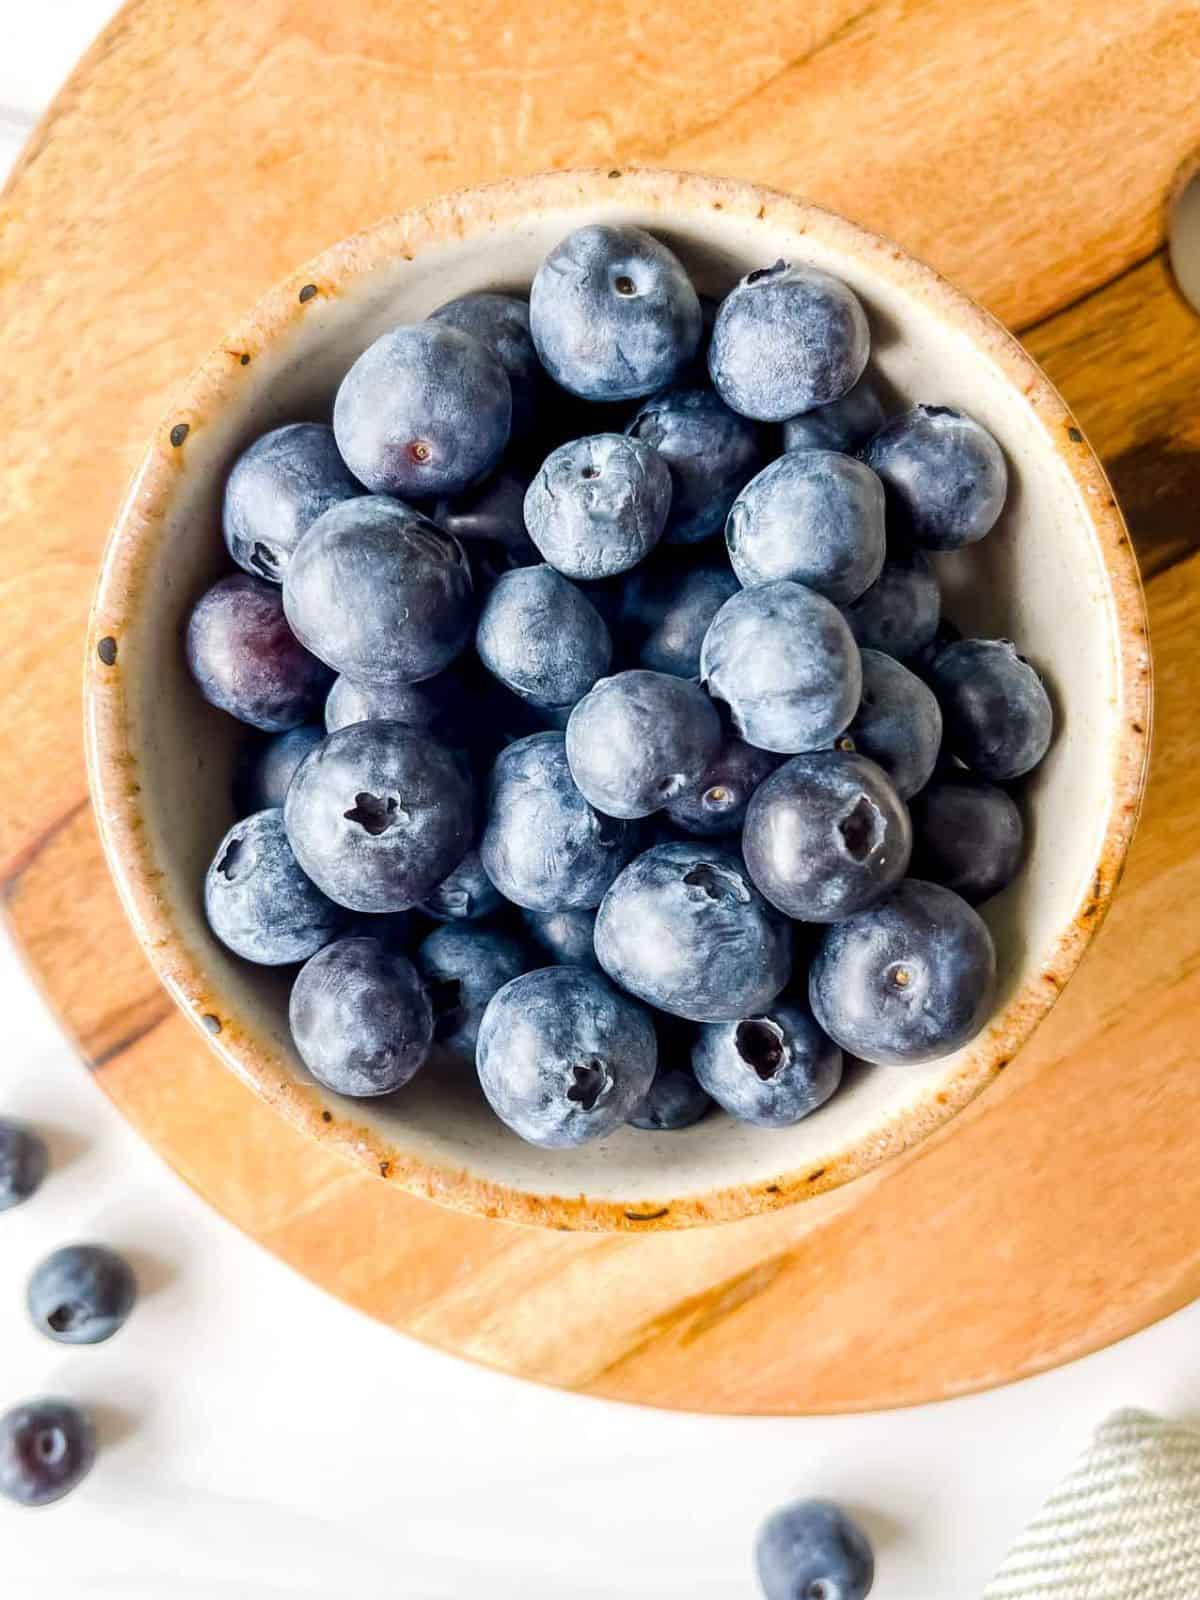 blueberries in a light cream bowl on a wooden board next to blueberries.